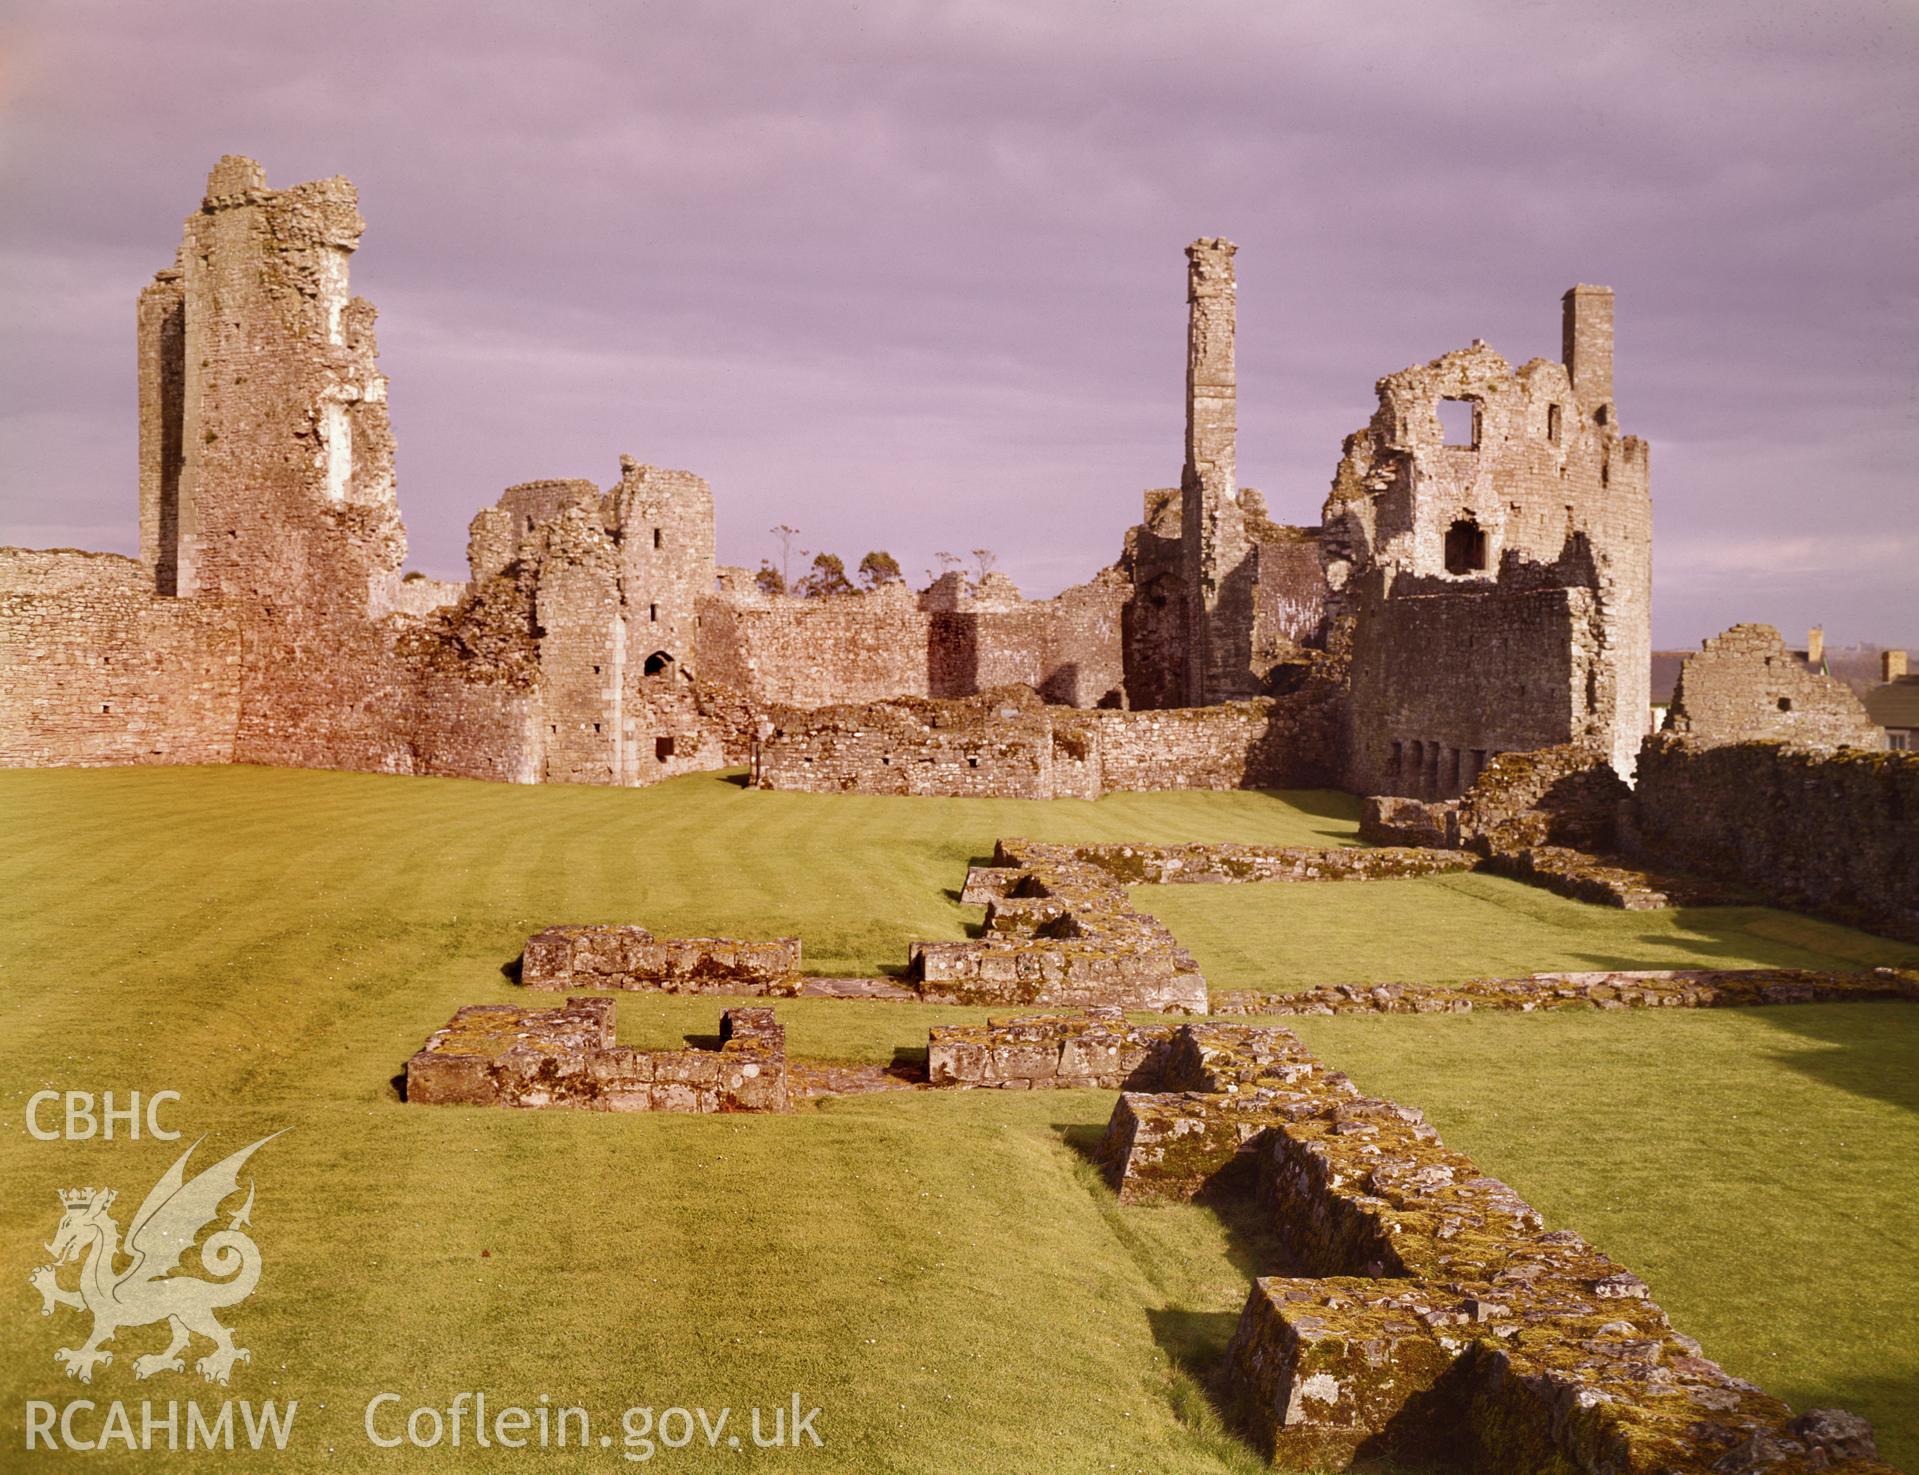 RCAHMW colour transparency showing Coity Castle, taken by RCAHMW, undated.